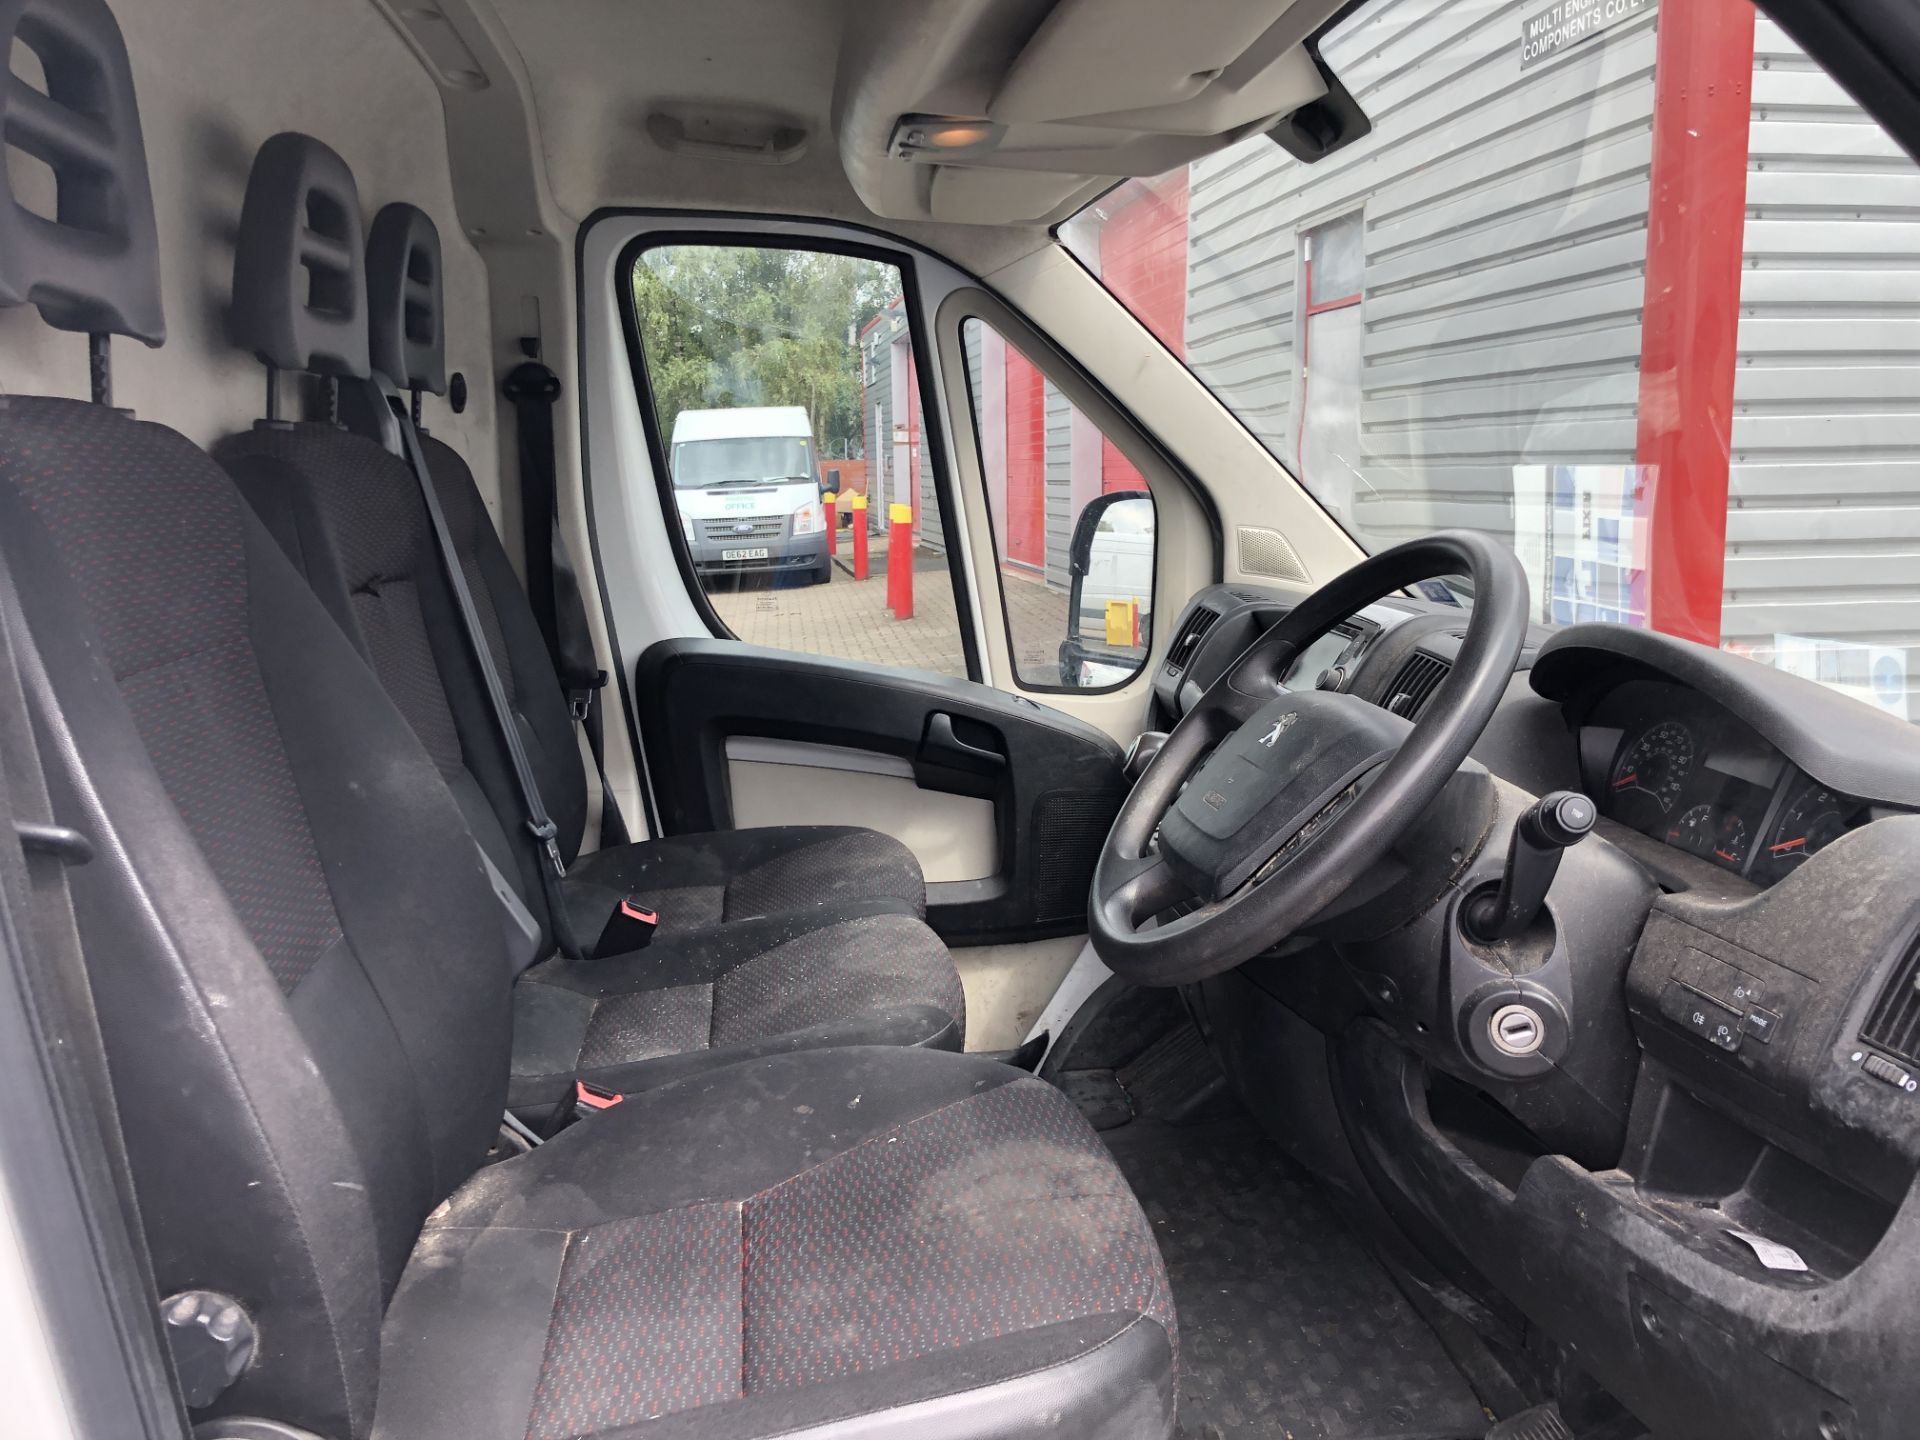 Peugeot Boxer 335 L3 Professional, 2,198cc Diesel, 6 Speed Manual, Panel Van with Glass Roof Rack - Image 17 of 32